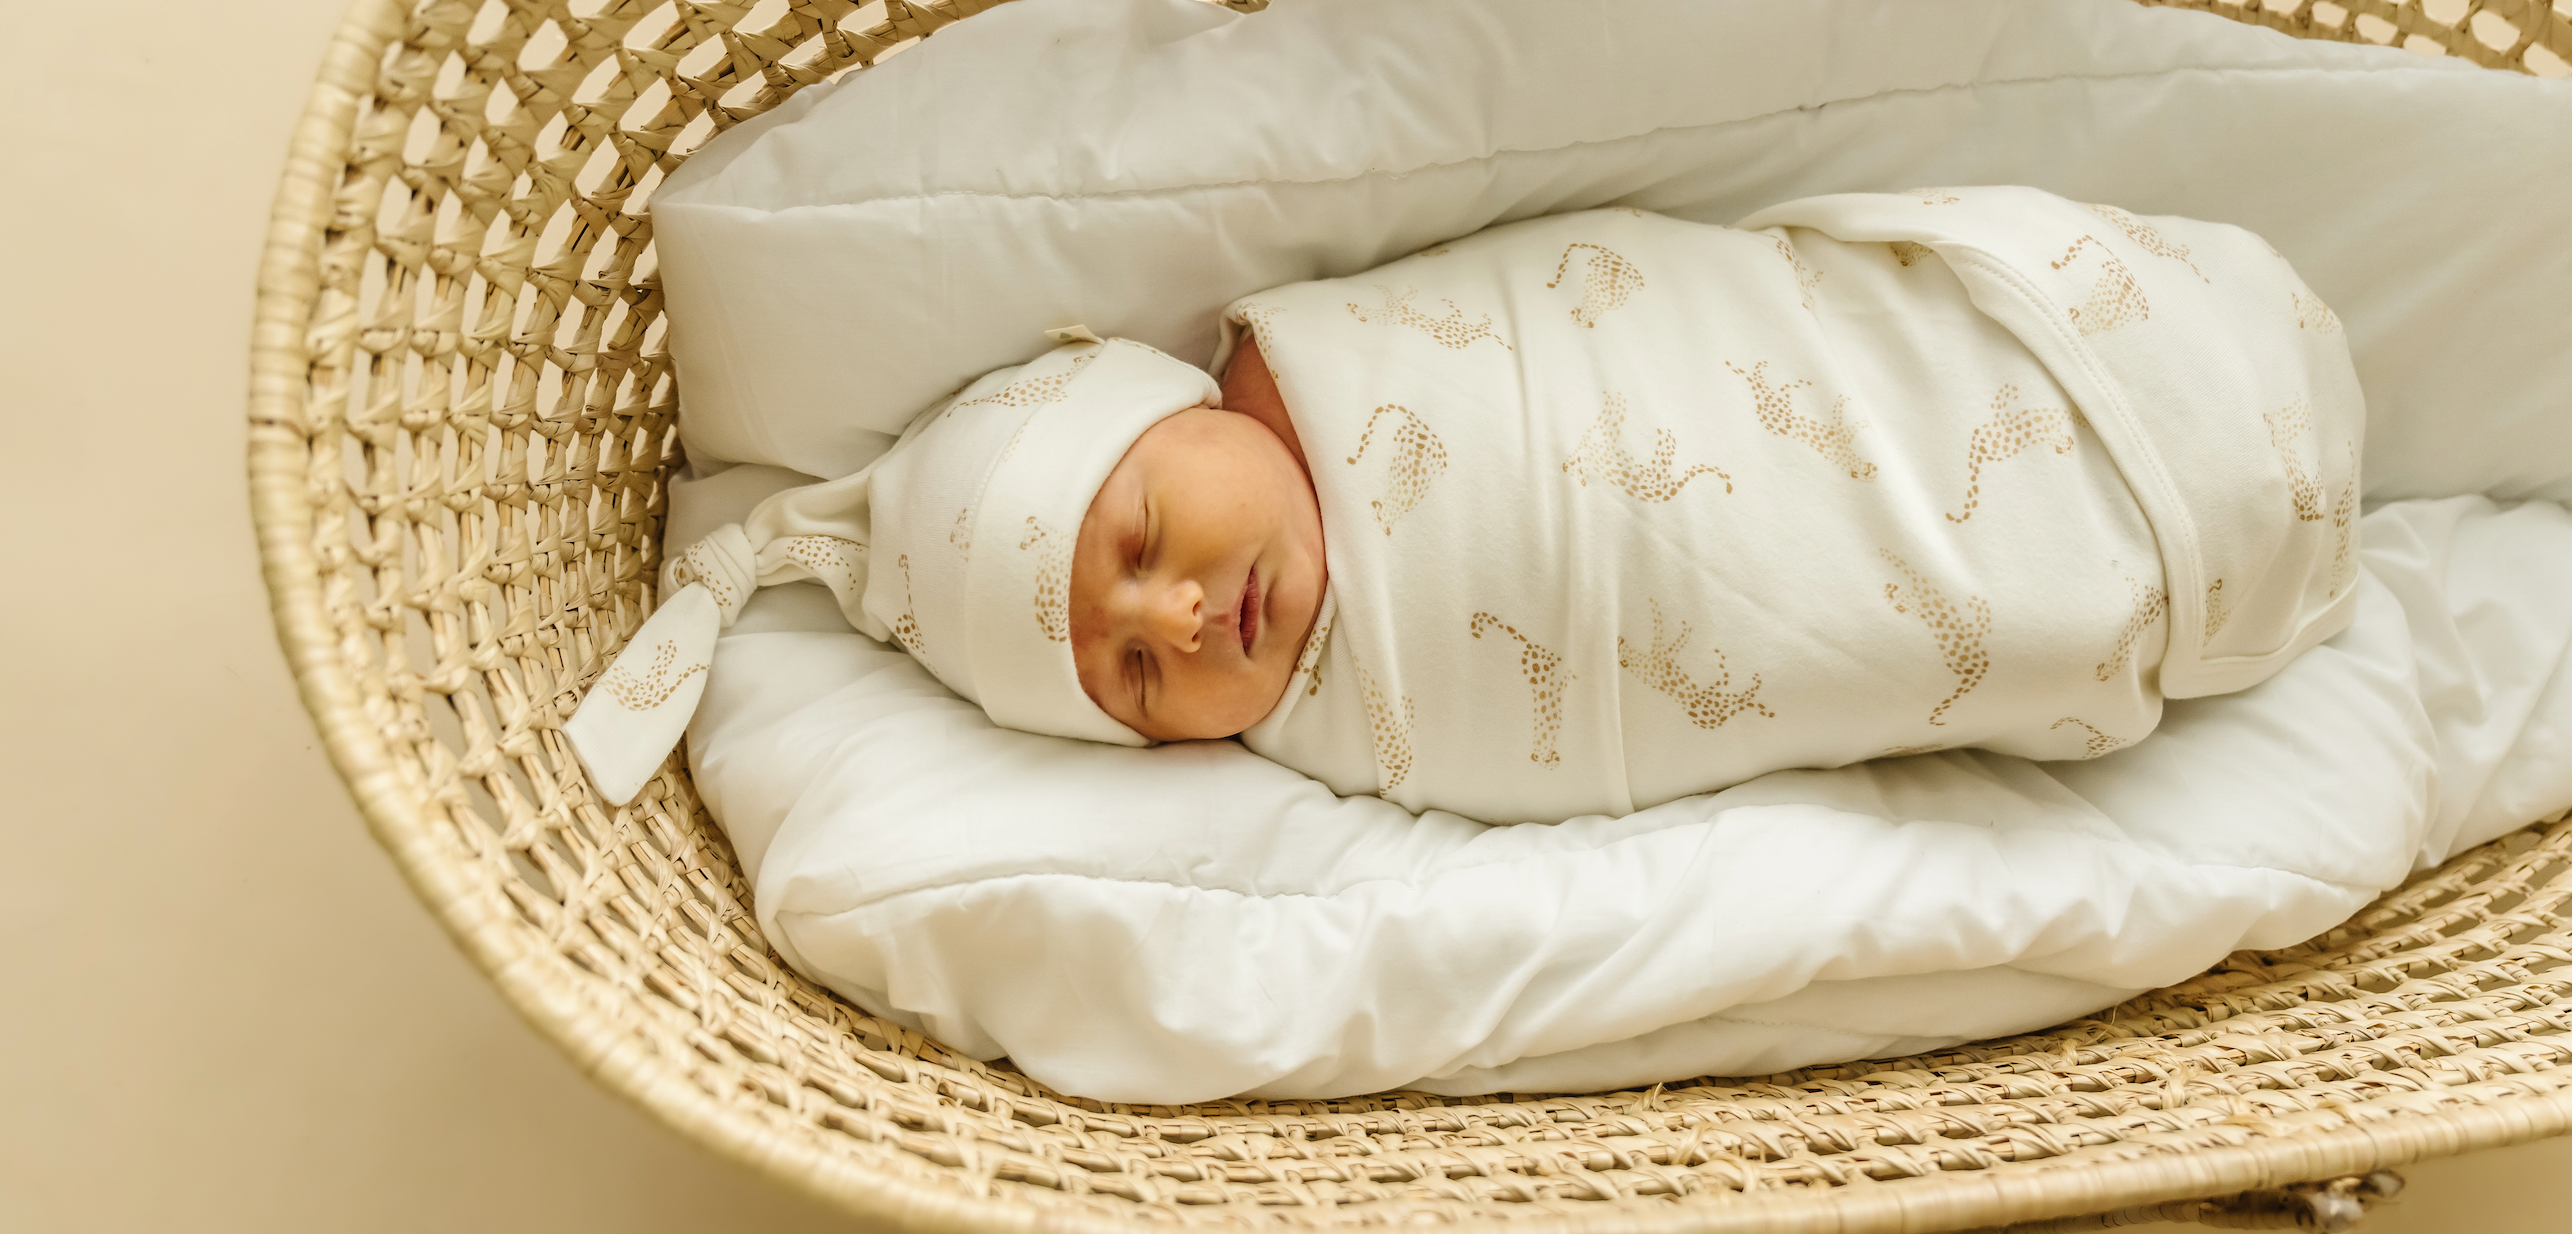 Newborn care basics: a guide for new parents